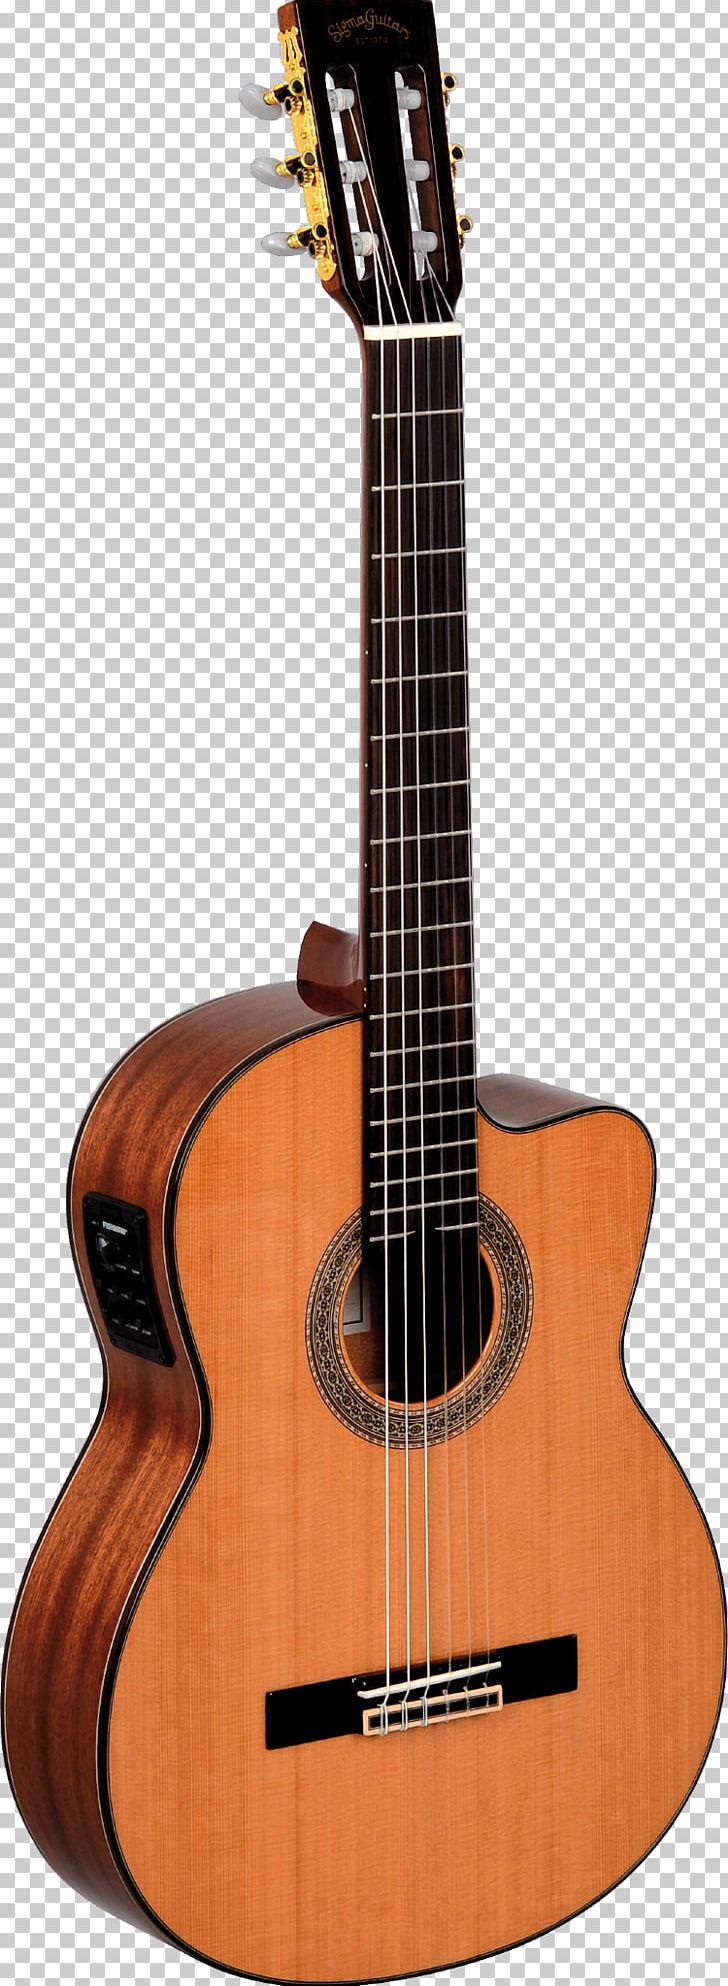 Acoustic-electric Guitar Classical Guitar Acoustic Guitar PNG, Clipart, Acoustic Electric Guitar, Classical Guitar, Cuatro, Cutaway, Guitar Accessory Free PNG Download